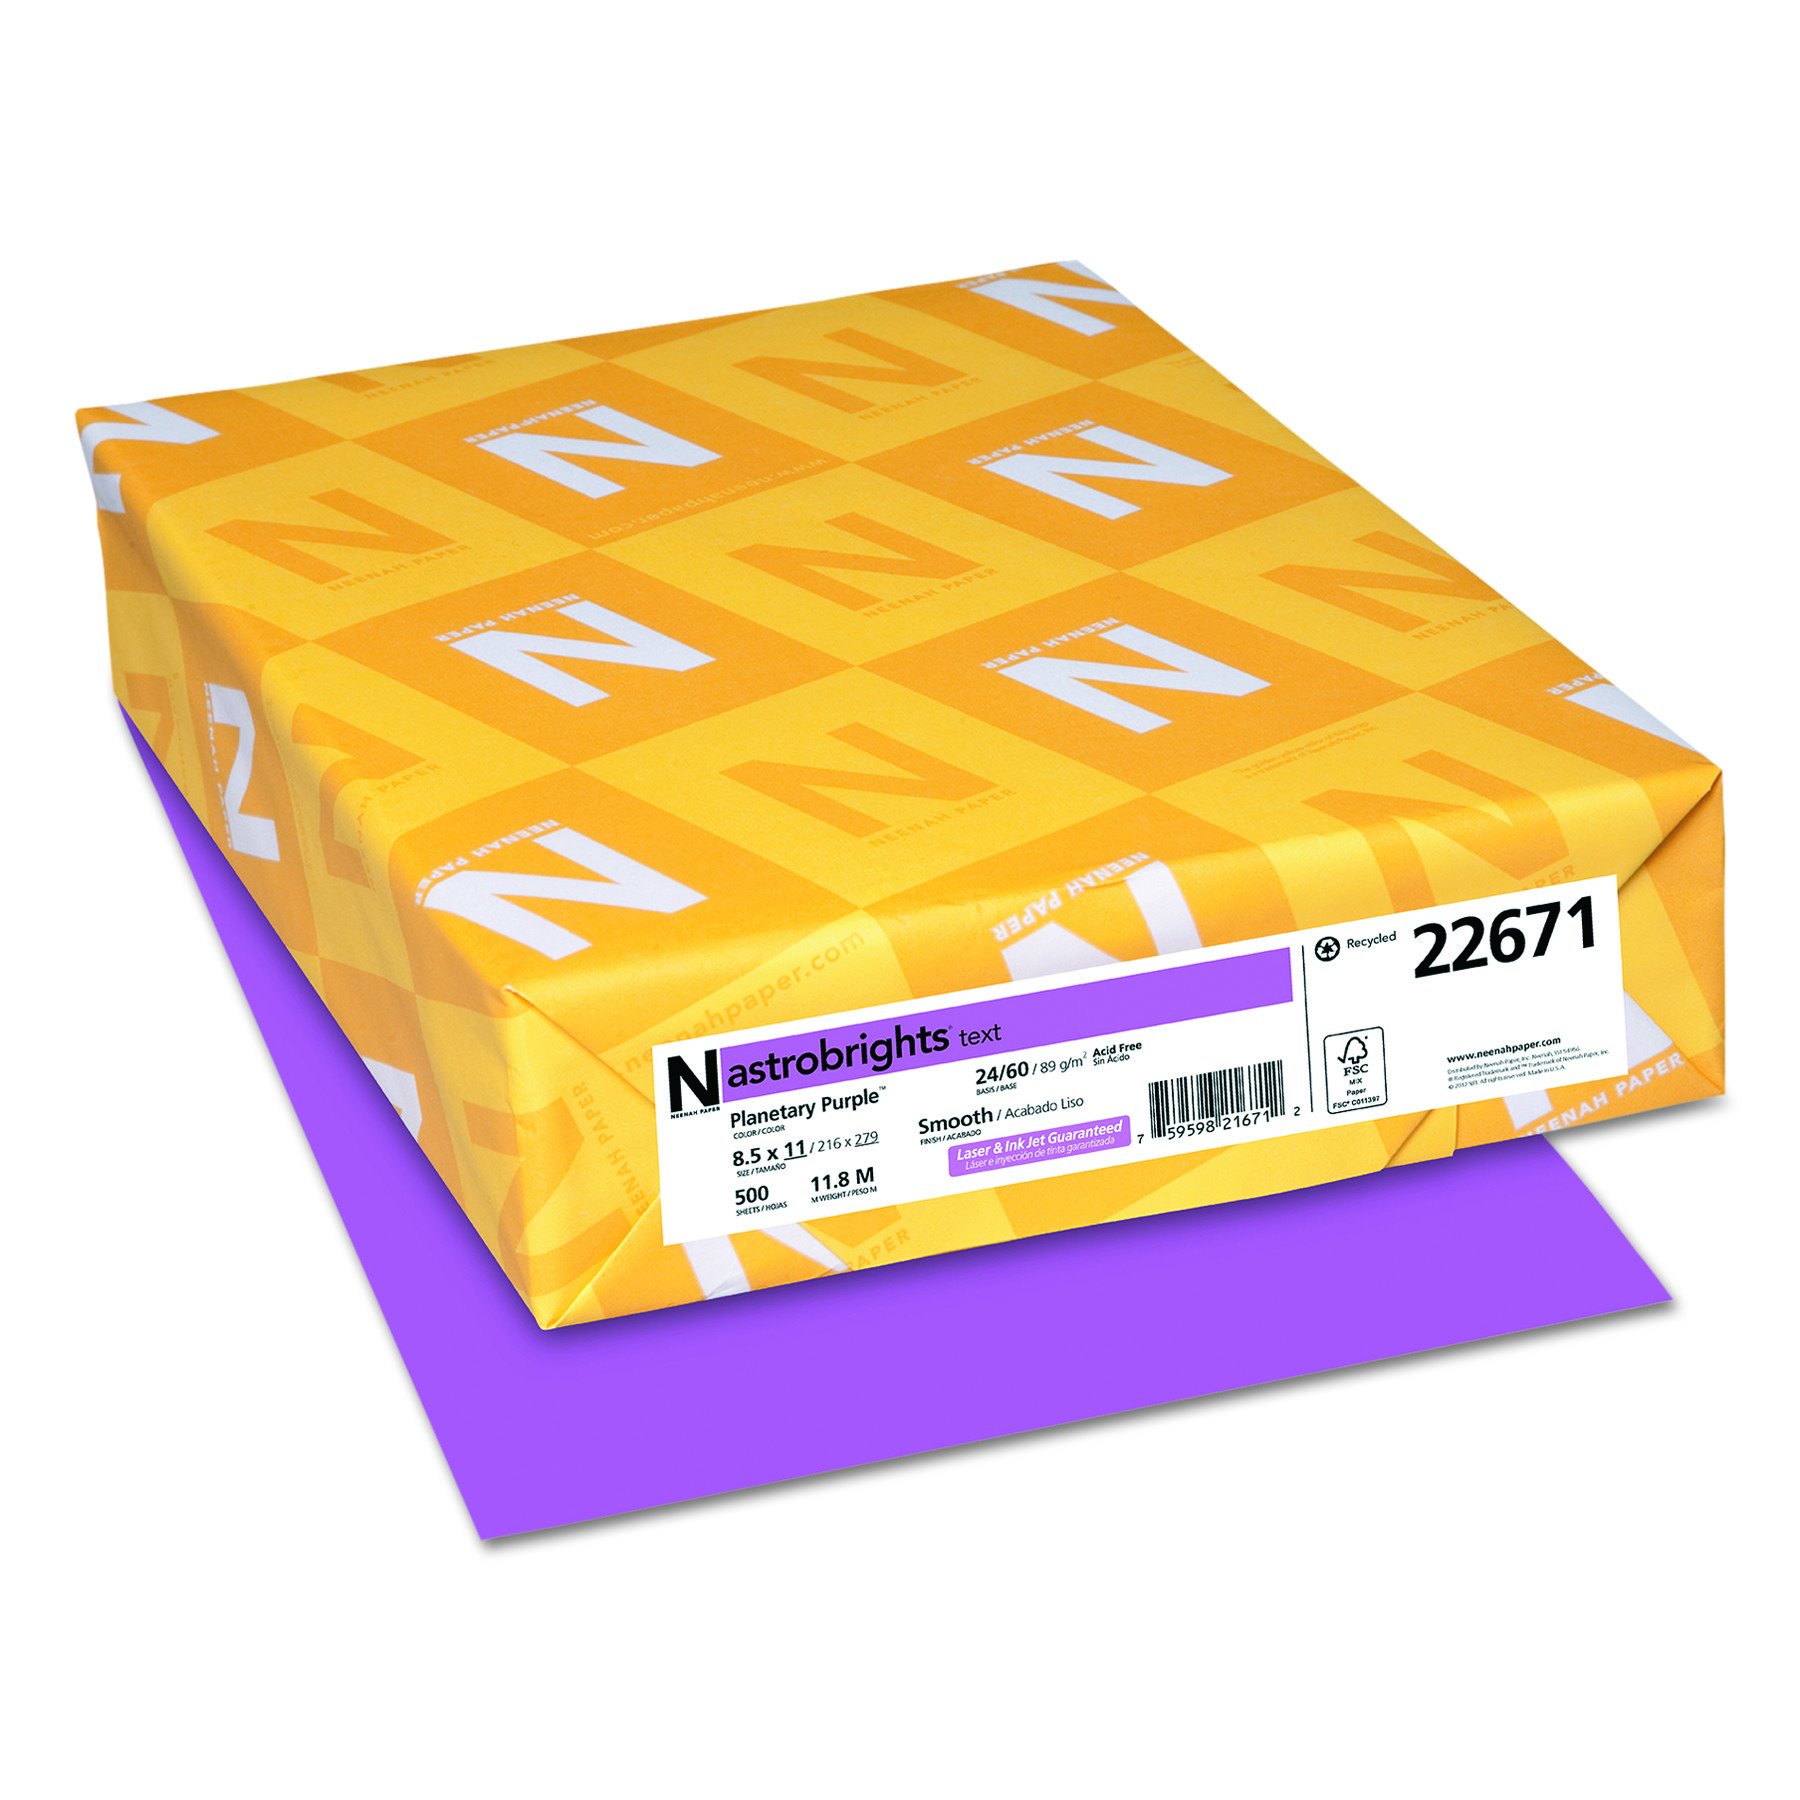 Book Cover Neenah Astrobrights Premium Color Paper, 24 lb, 8.5 x 11 Inches, 500 Sheets, Planetary Purple (22671)